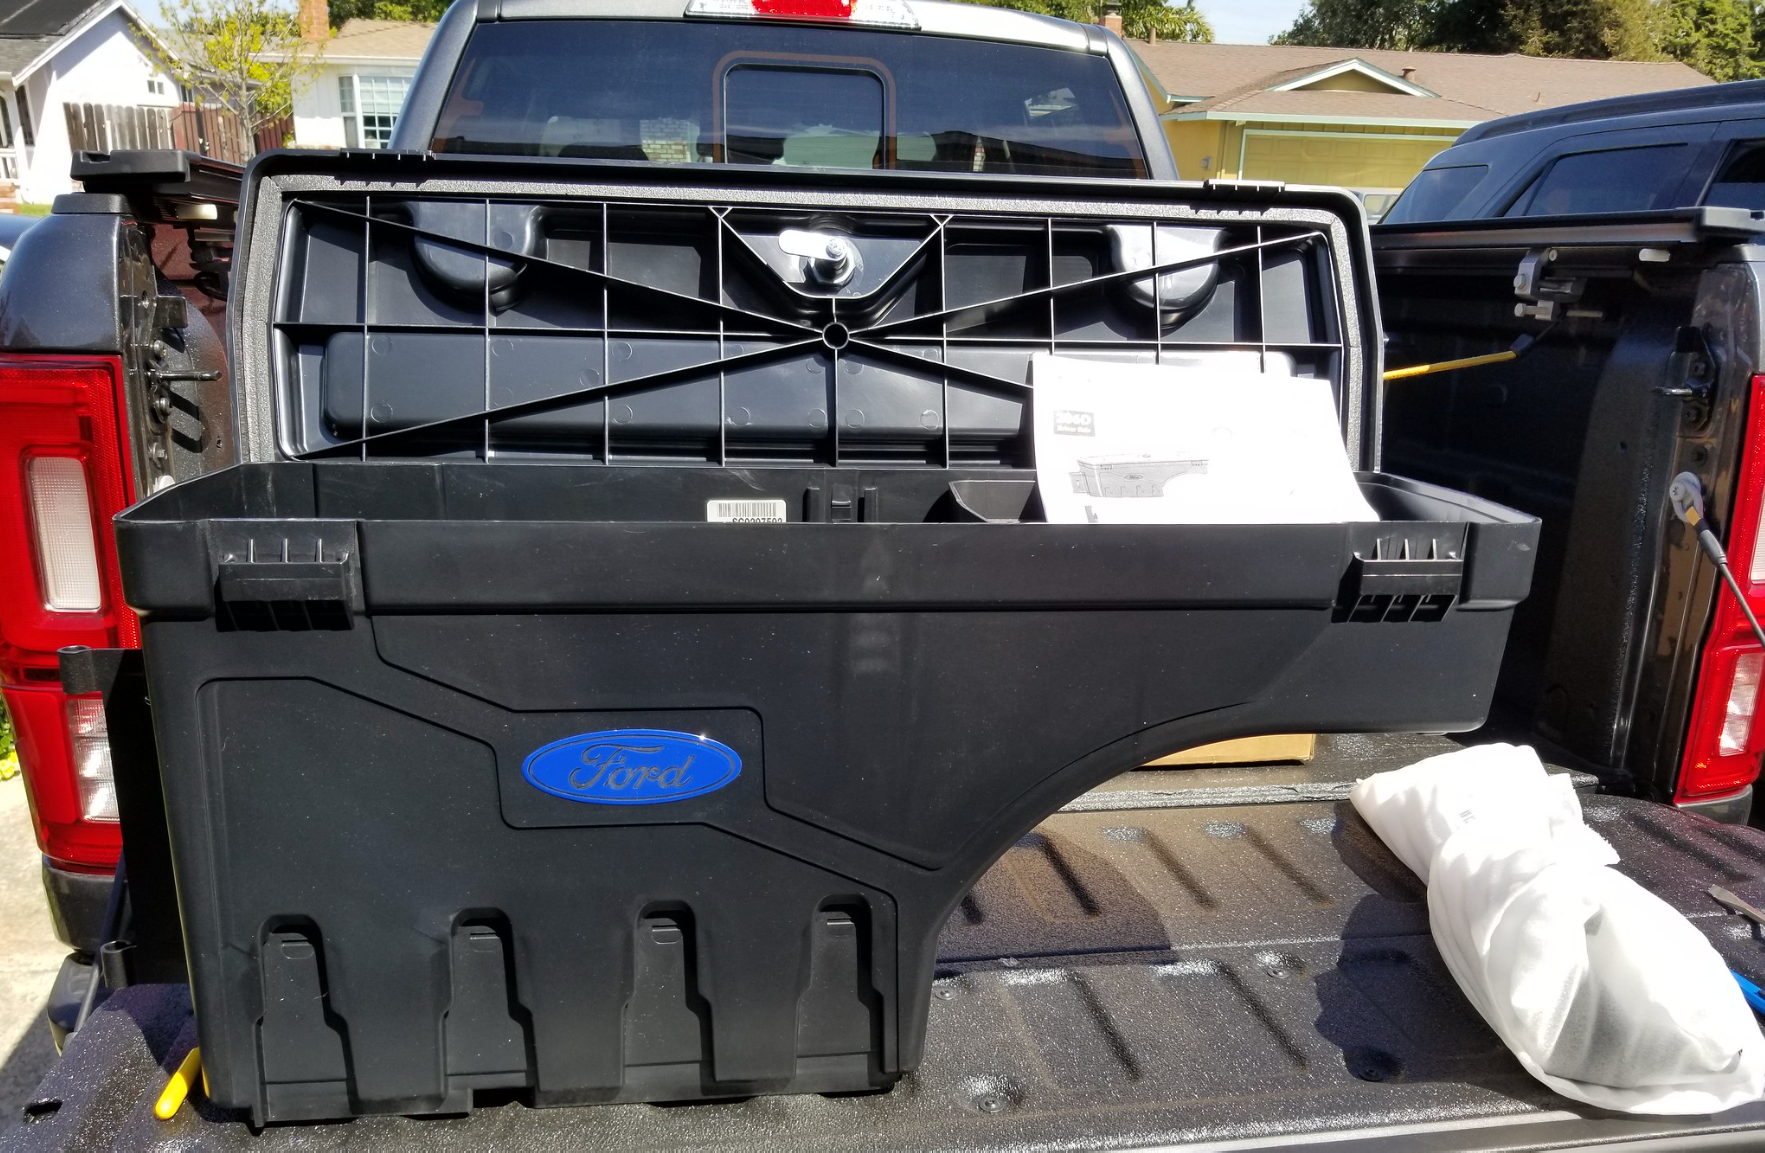 2021 F150 Lariat lump under backseat floor? - Ford F150 Forum - Community  of Ford Truck Fans